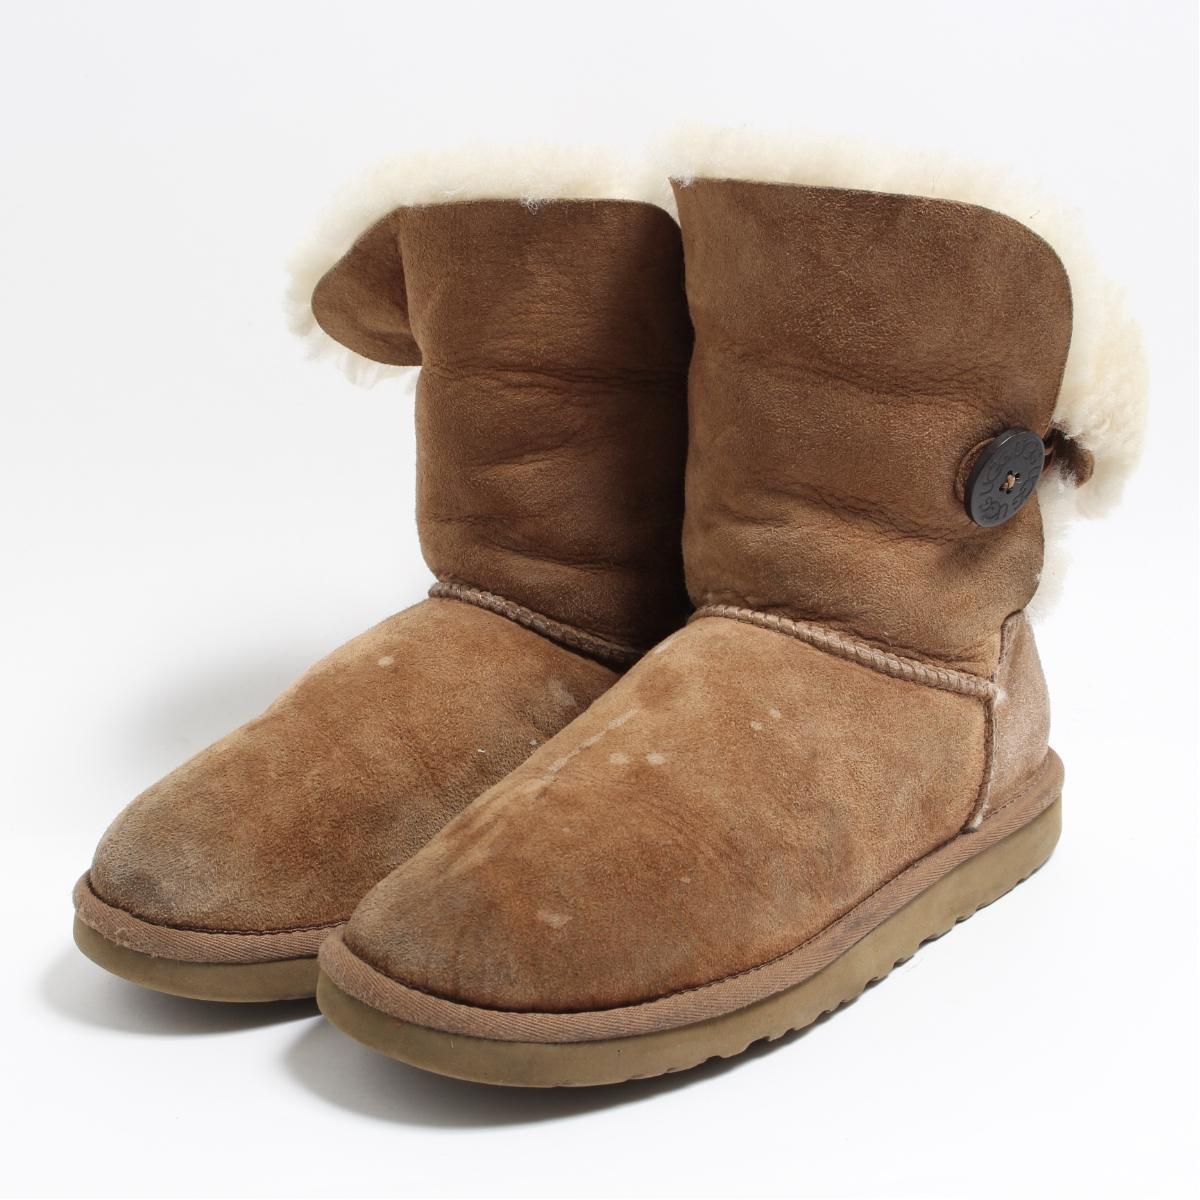 UGG ✿ BAILEY BUTTON ・ US 8 ✿ ムートンブーツ - ブーツ